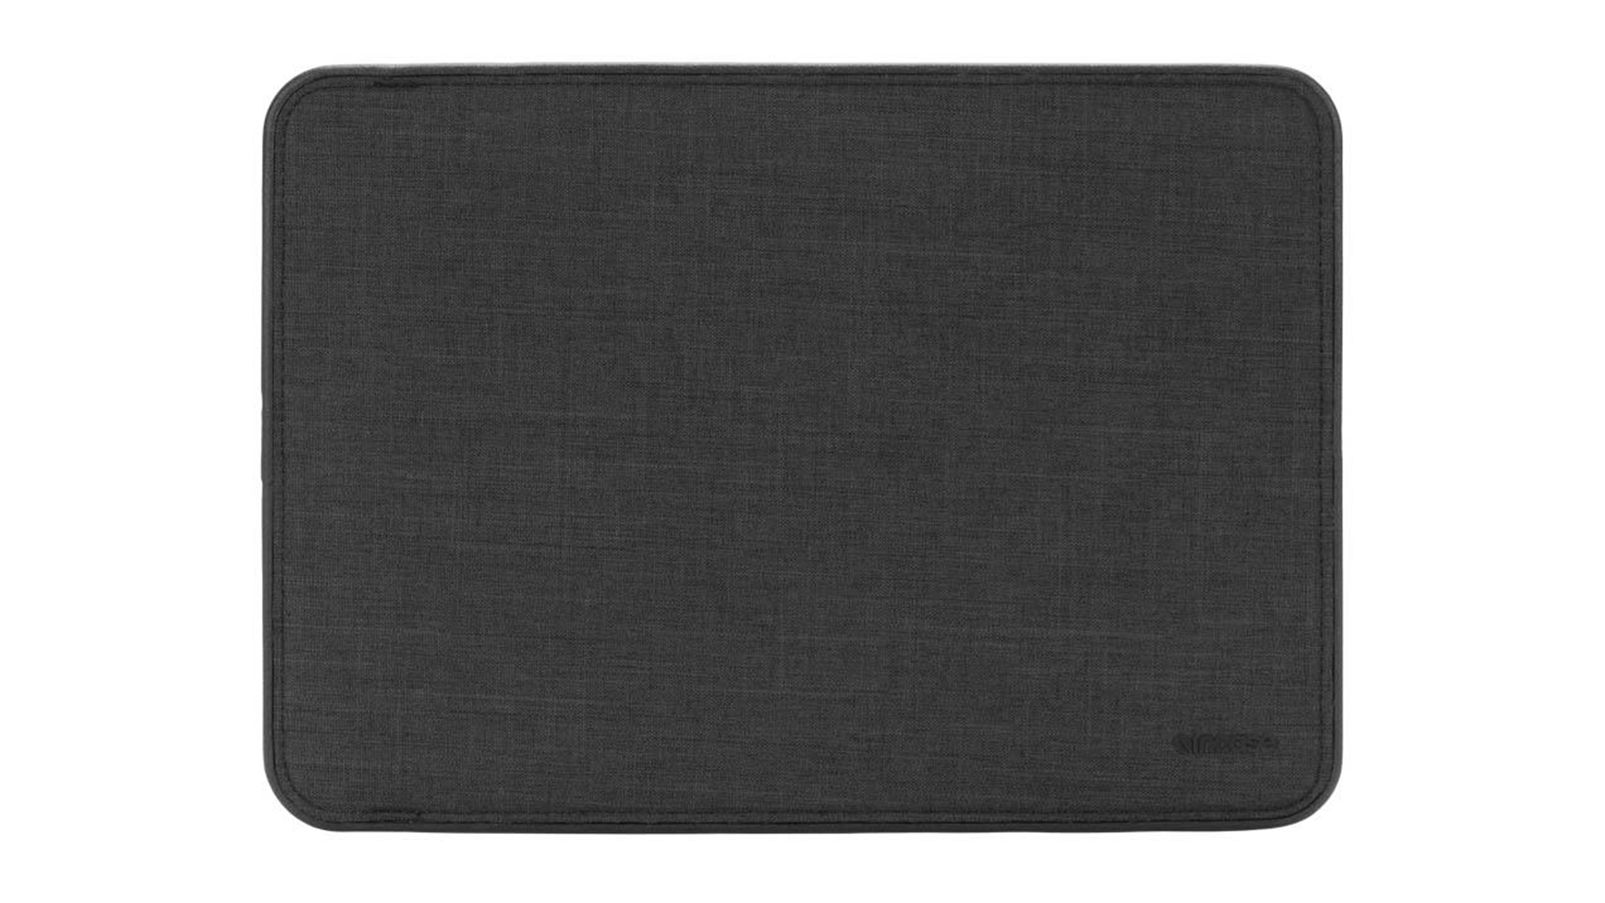 Incase - Carry Sleeve for 13 Laptop - Graphite